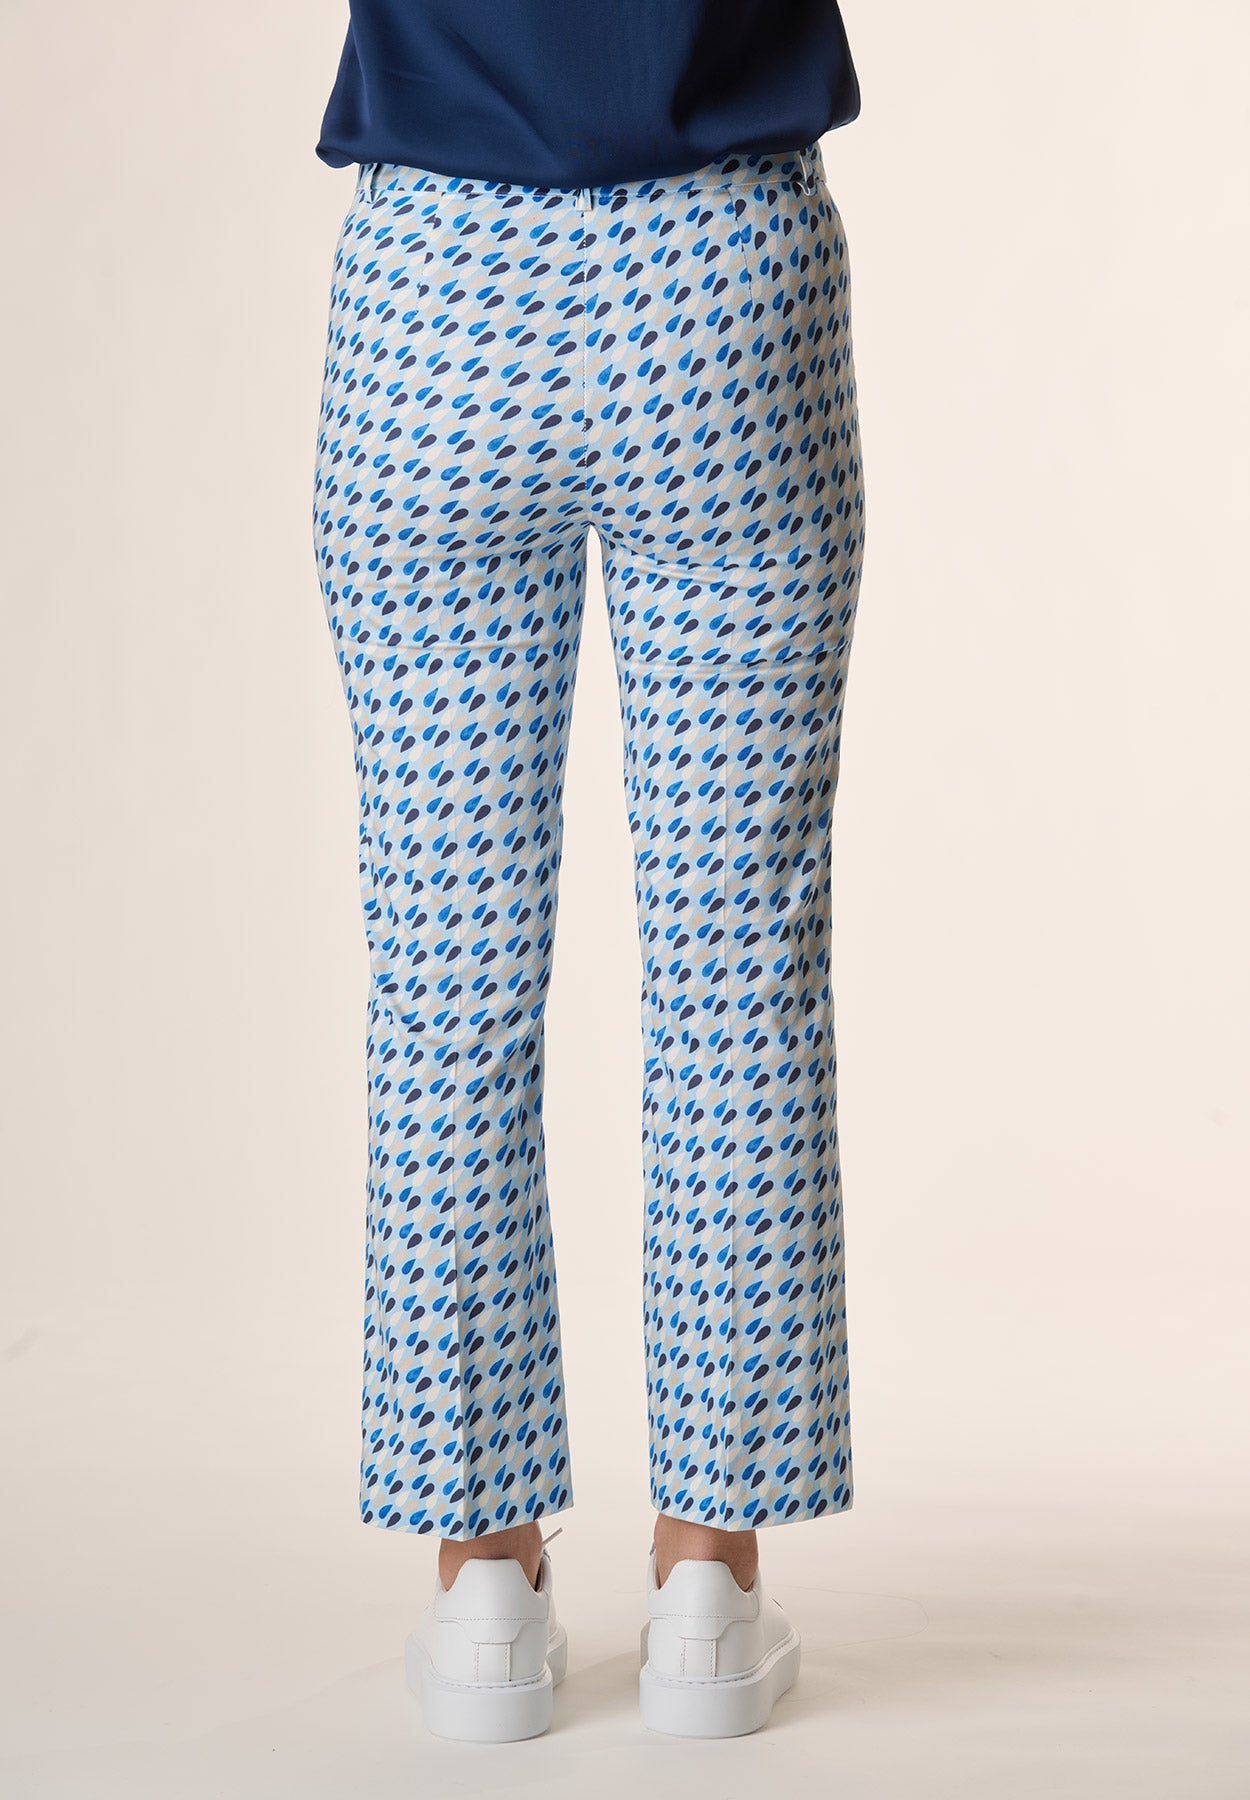 Light blue trousers with drop pattern